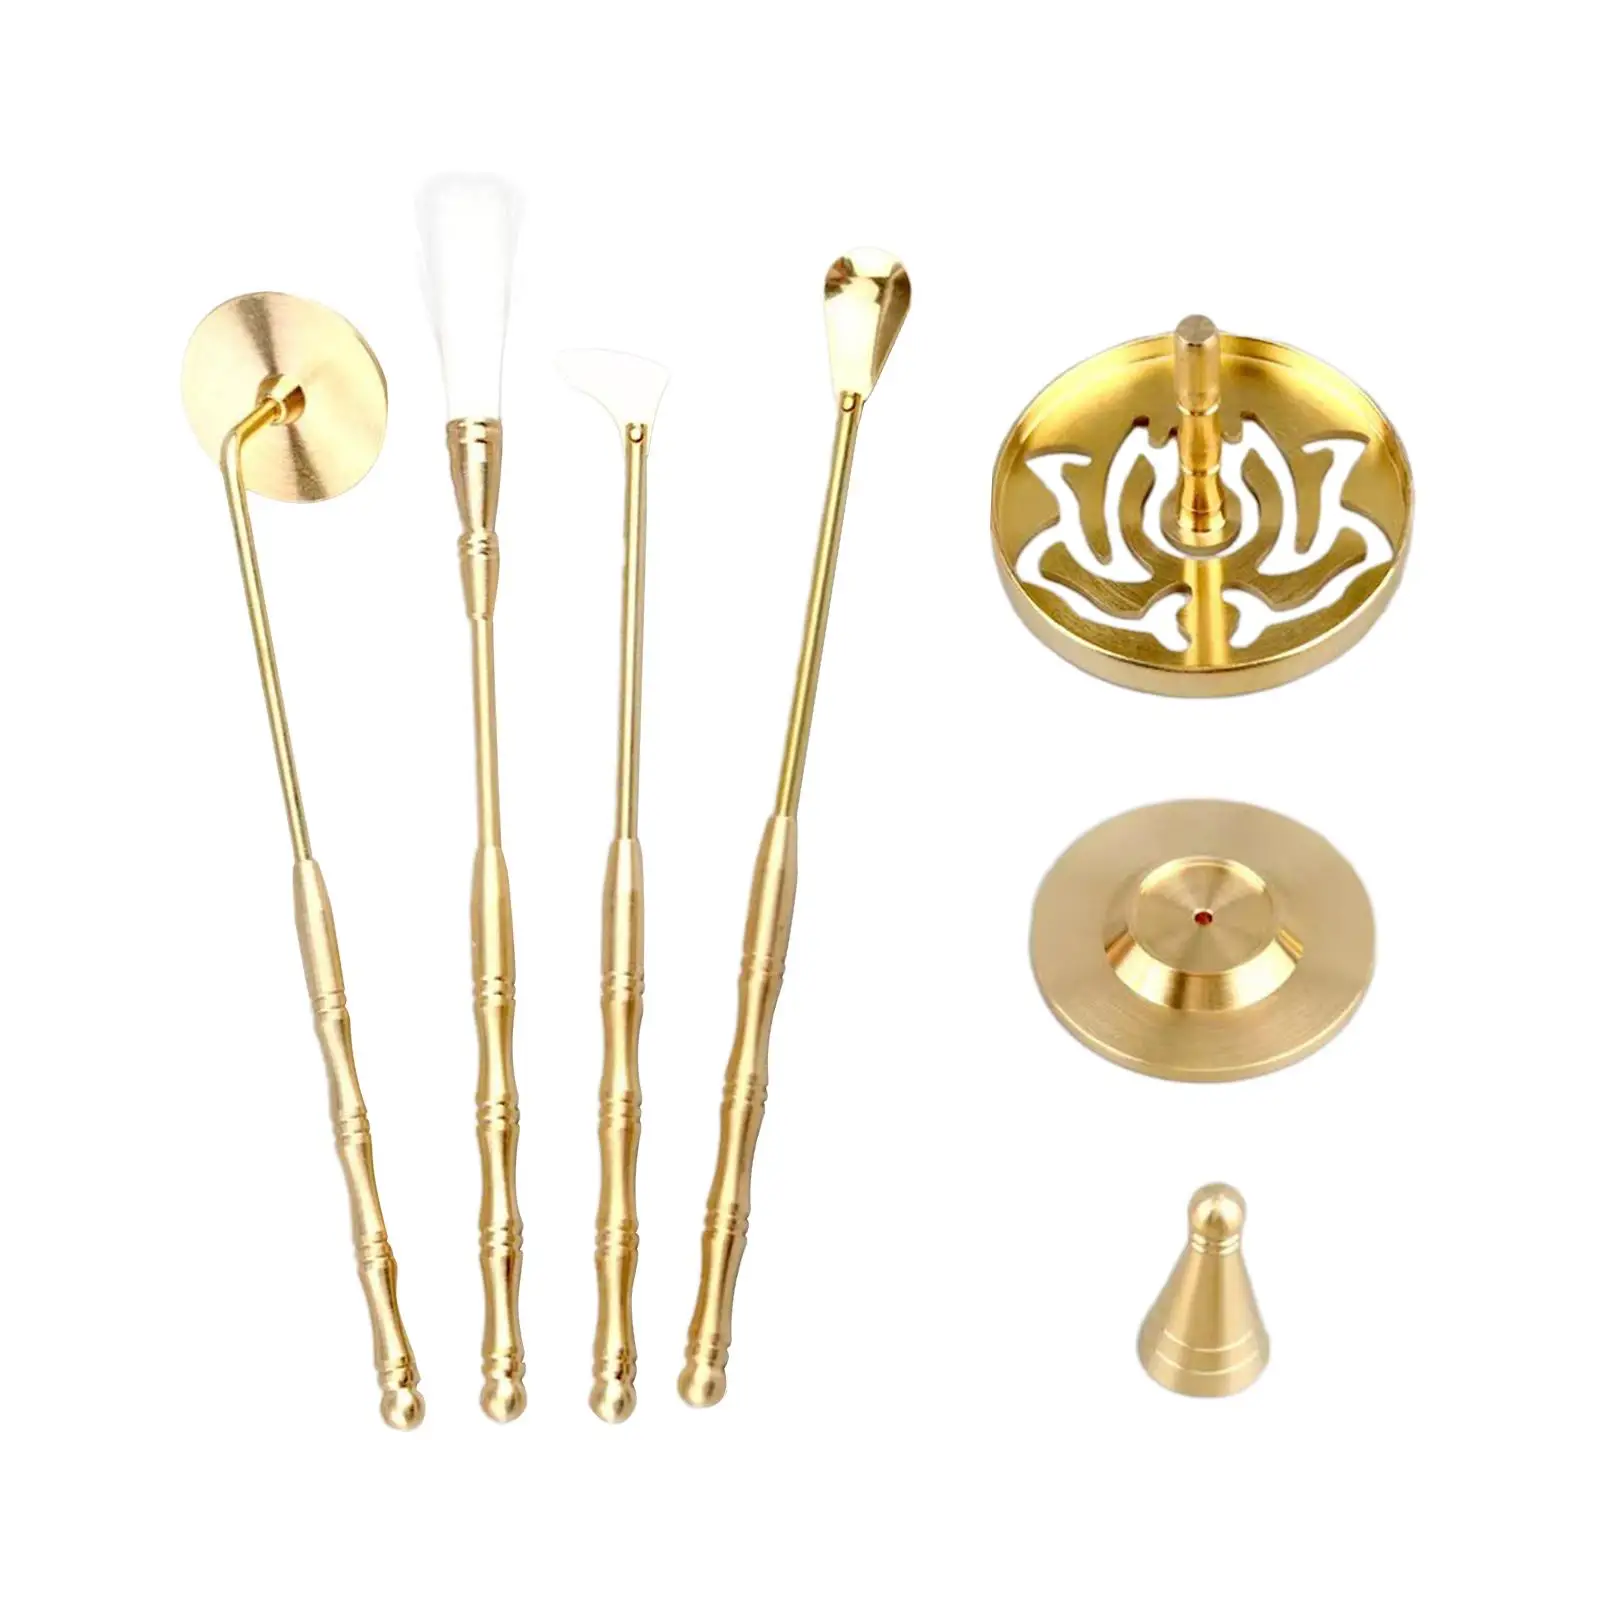 7 Pieces Brass Incense Making Set Incense Spoon Incense Ash Press DIY Incense Fragrance Accessories Chinese Incense Ceremony Set